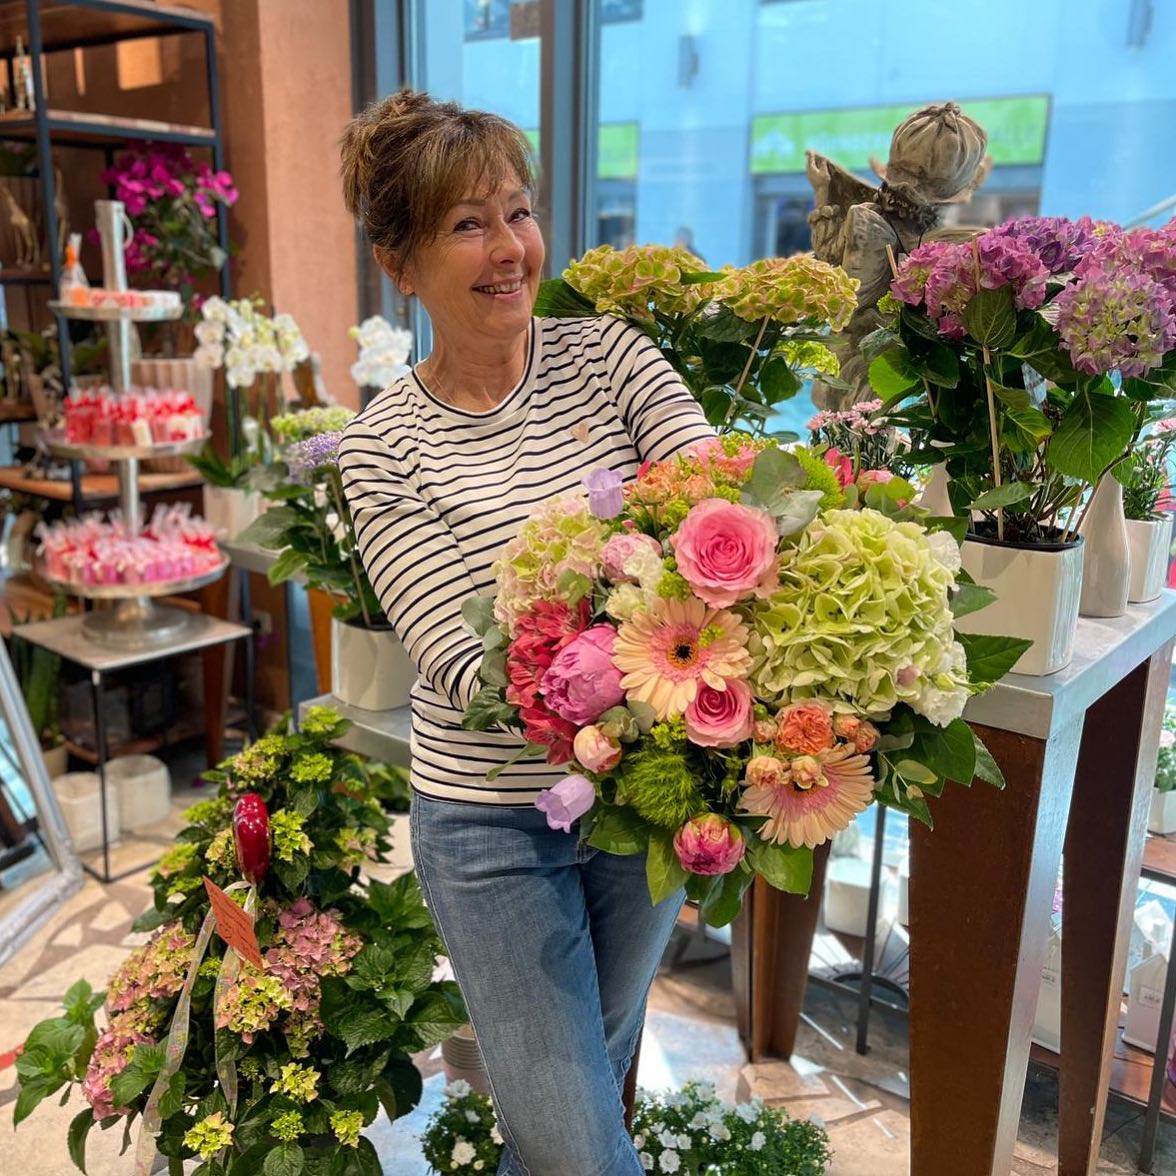 We love it ❤️ flowers just in time 🌸 Take a deep breath and you will smile 🥰☺️ #itstimeforflowers #weloveit #doit #buyyourselfflowers #sopretty #whynot #nicetomeetyou #roses #pink #bunchofflowers @casadeifiorinbg #houseofflowers